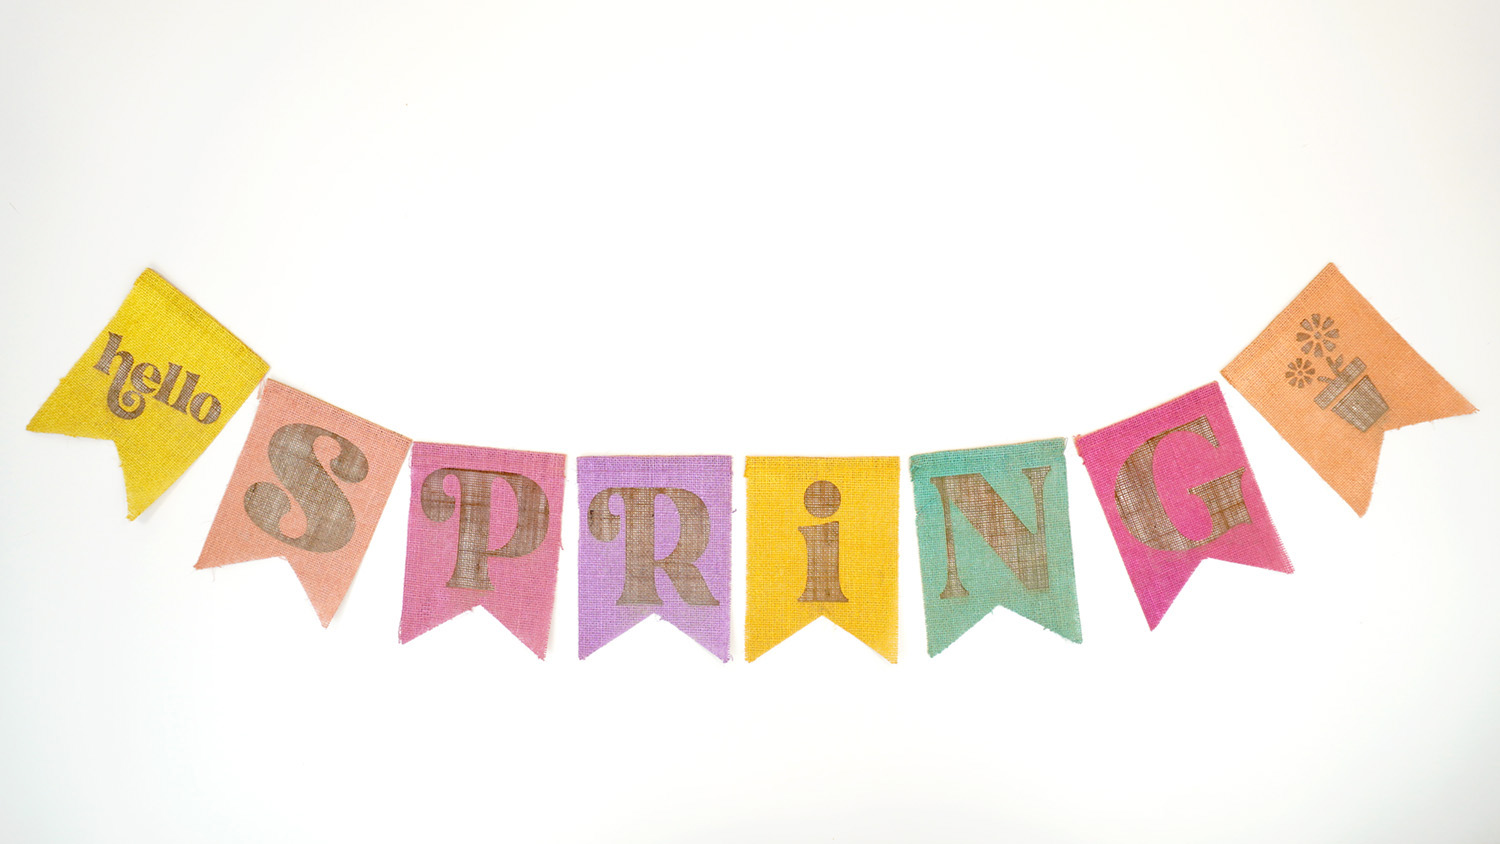 Colorful "Hello Spring" laser engraved burlap banner pieces on a white background